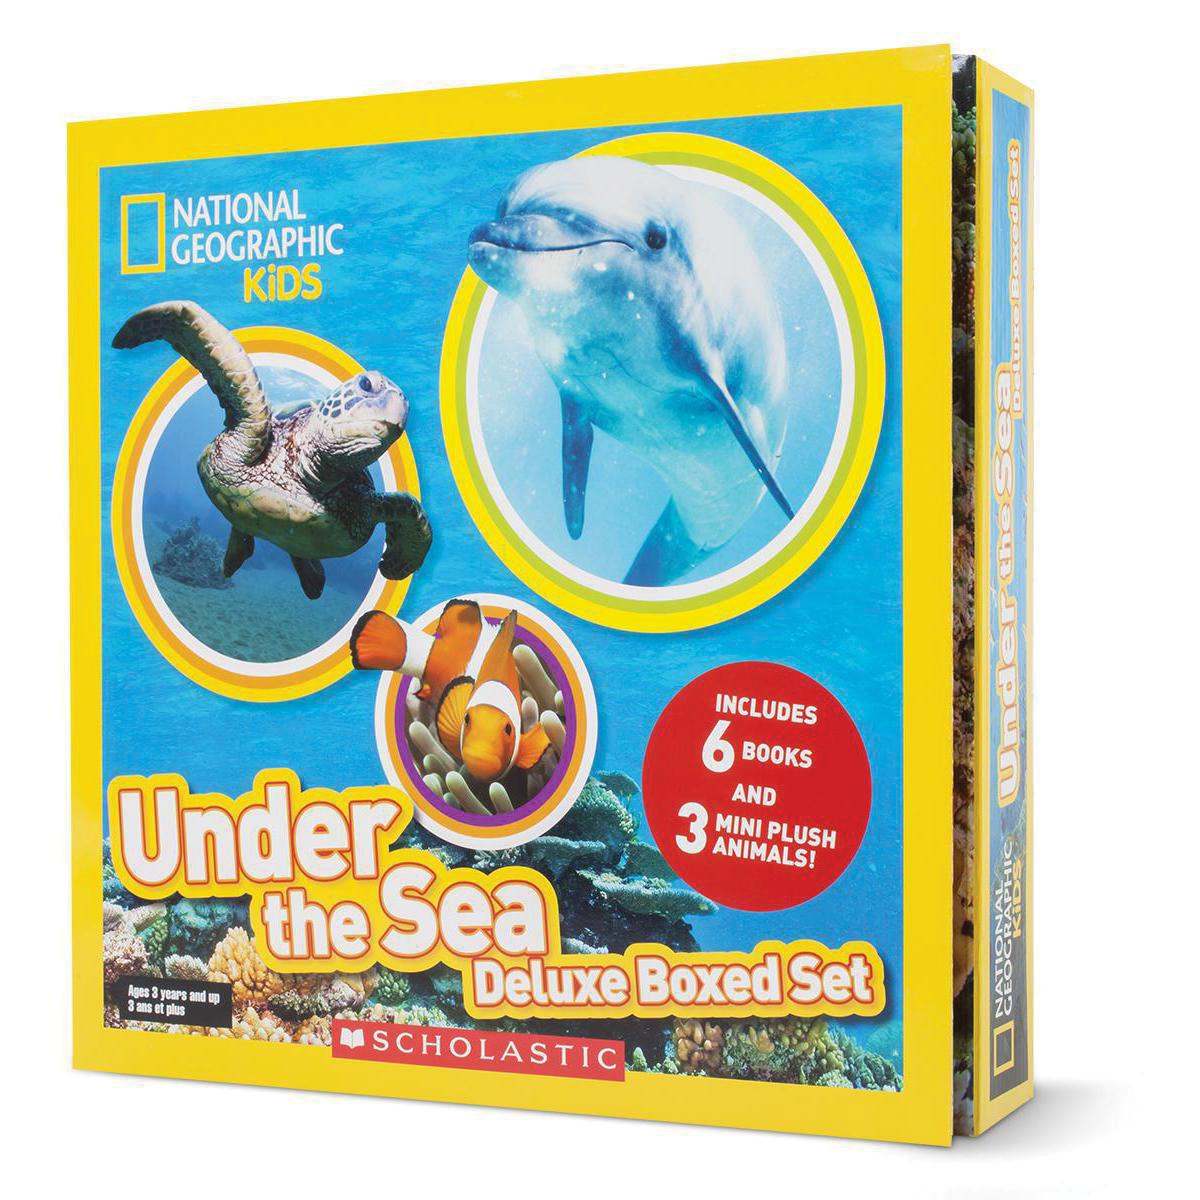  National Geographic Kids: Under the Sea Deluxe Boxed Set 